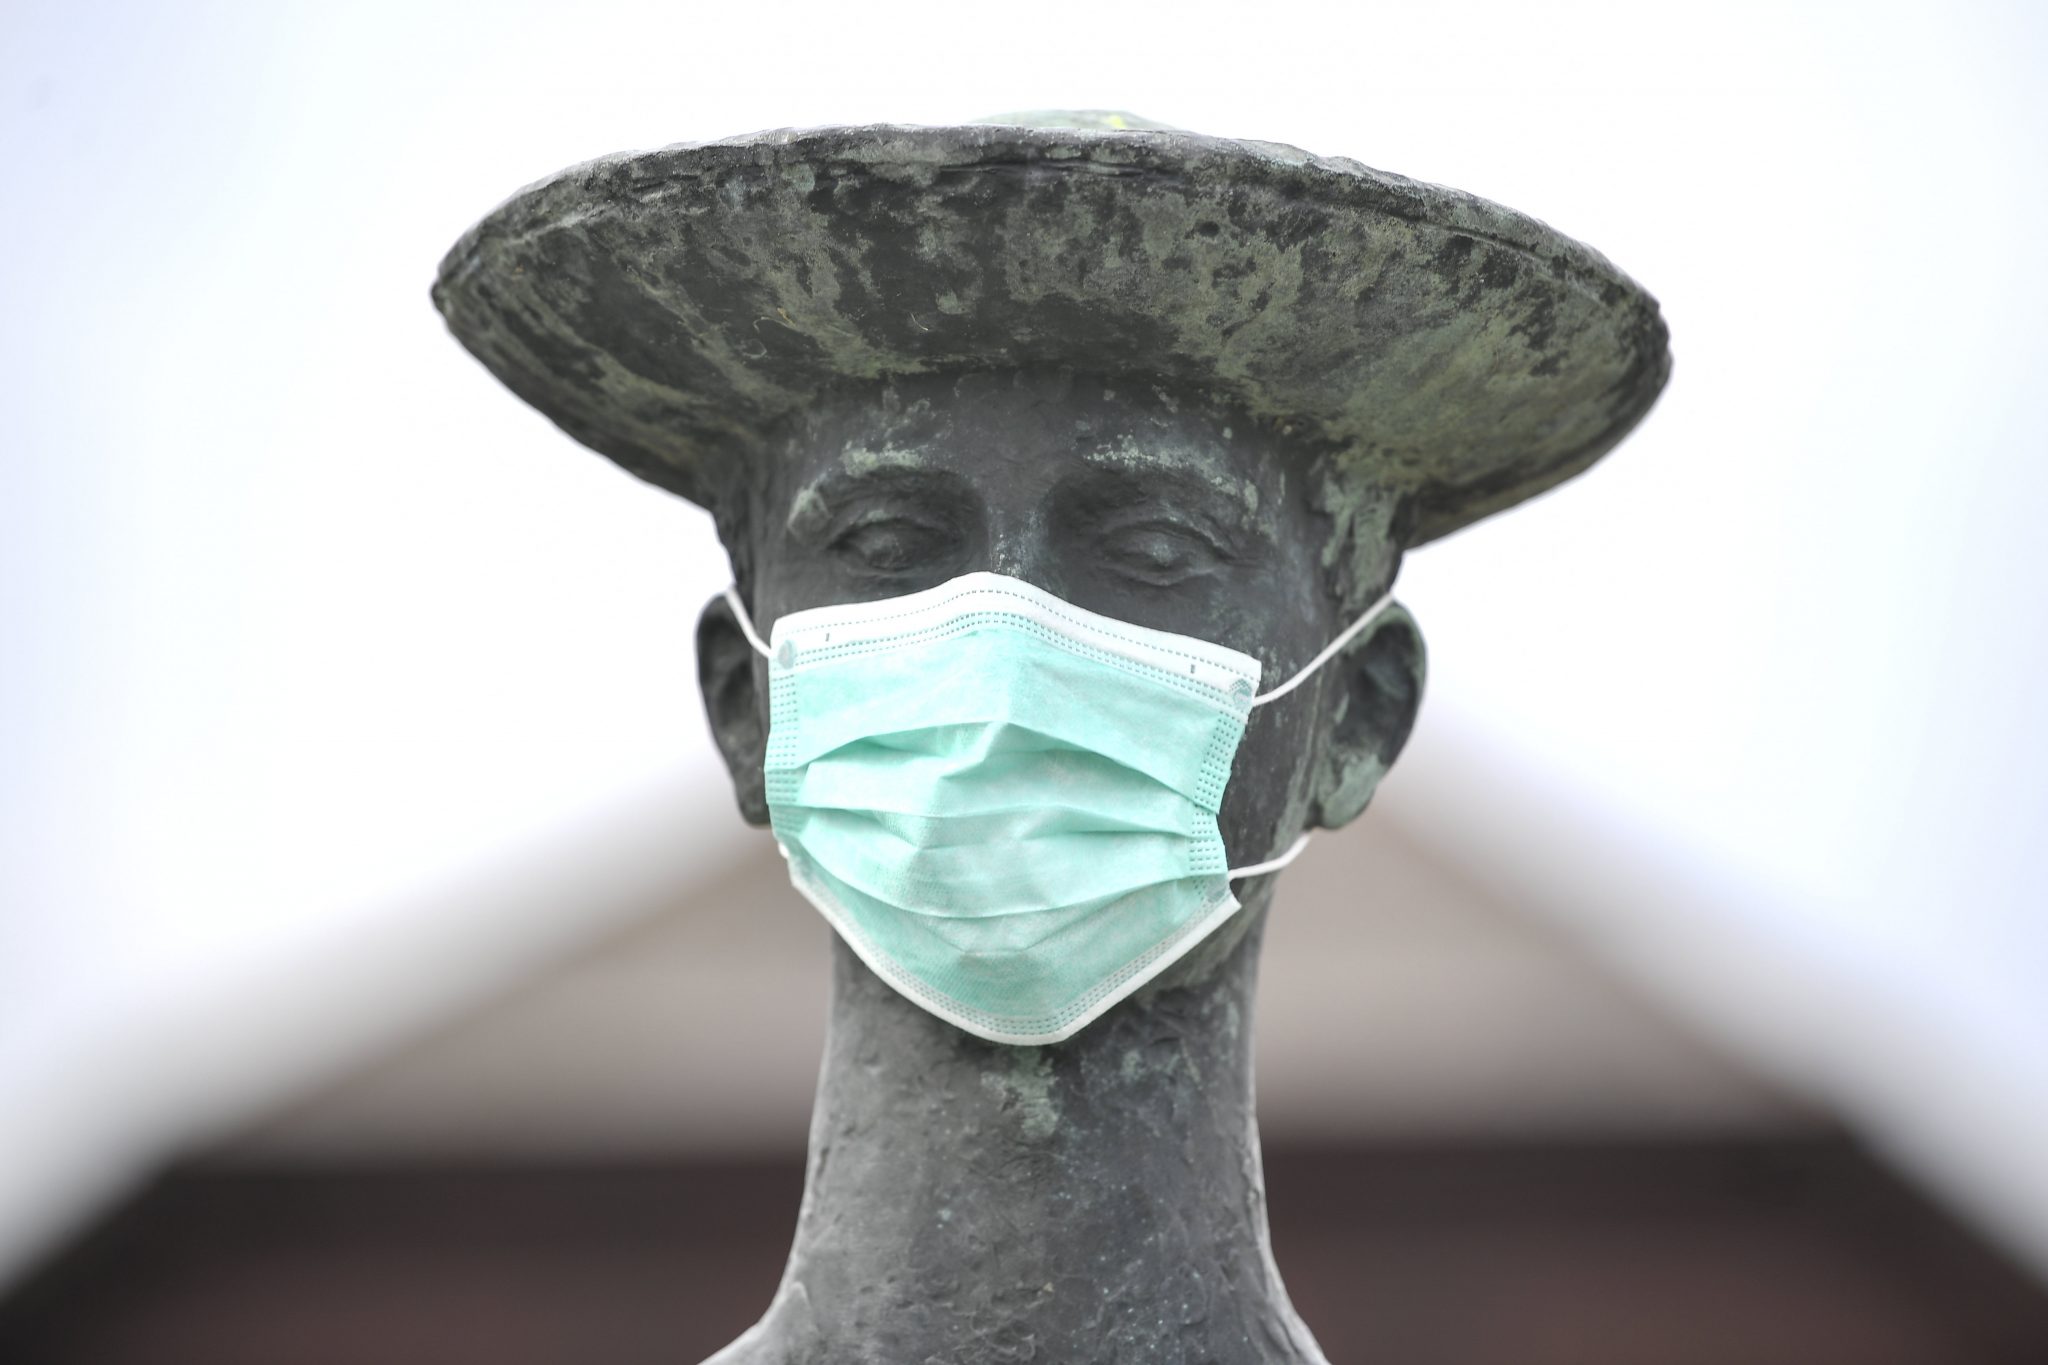 Wearing Face Masks: Must-have or Unneccessary and Even Harmful?